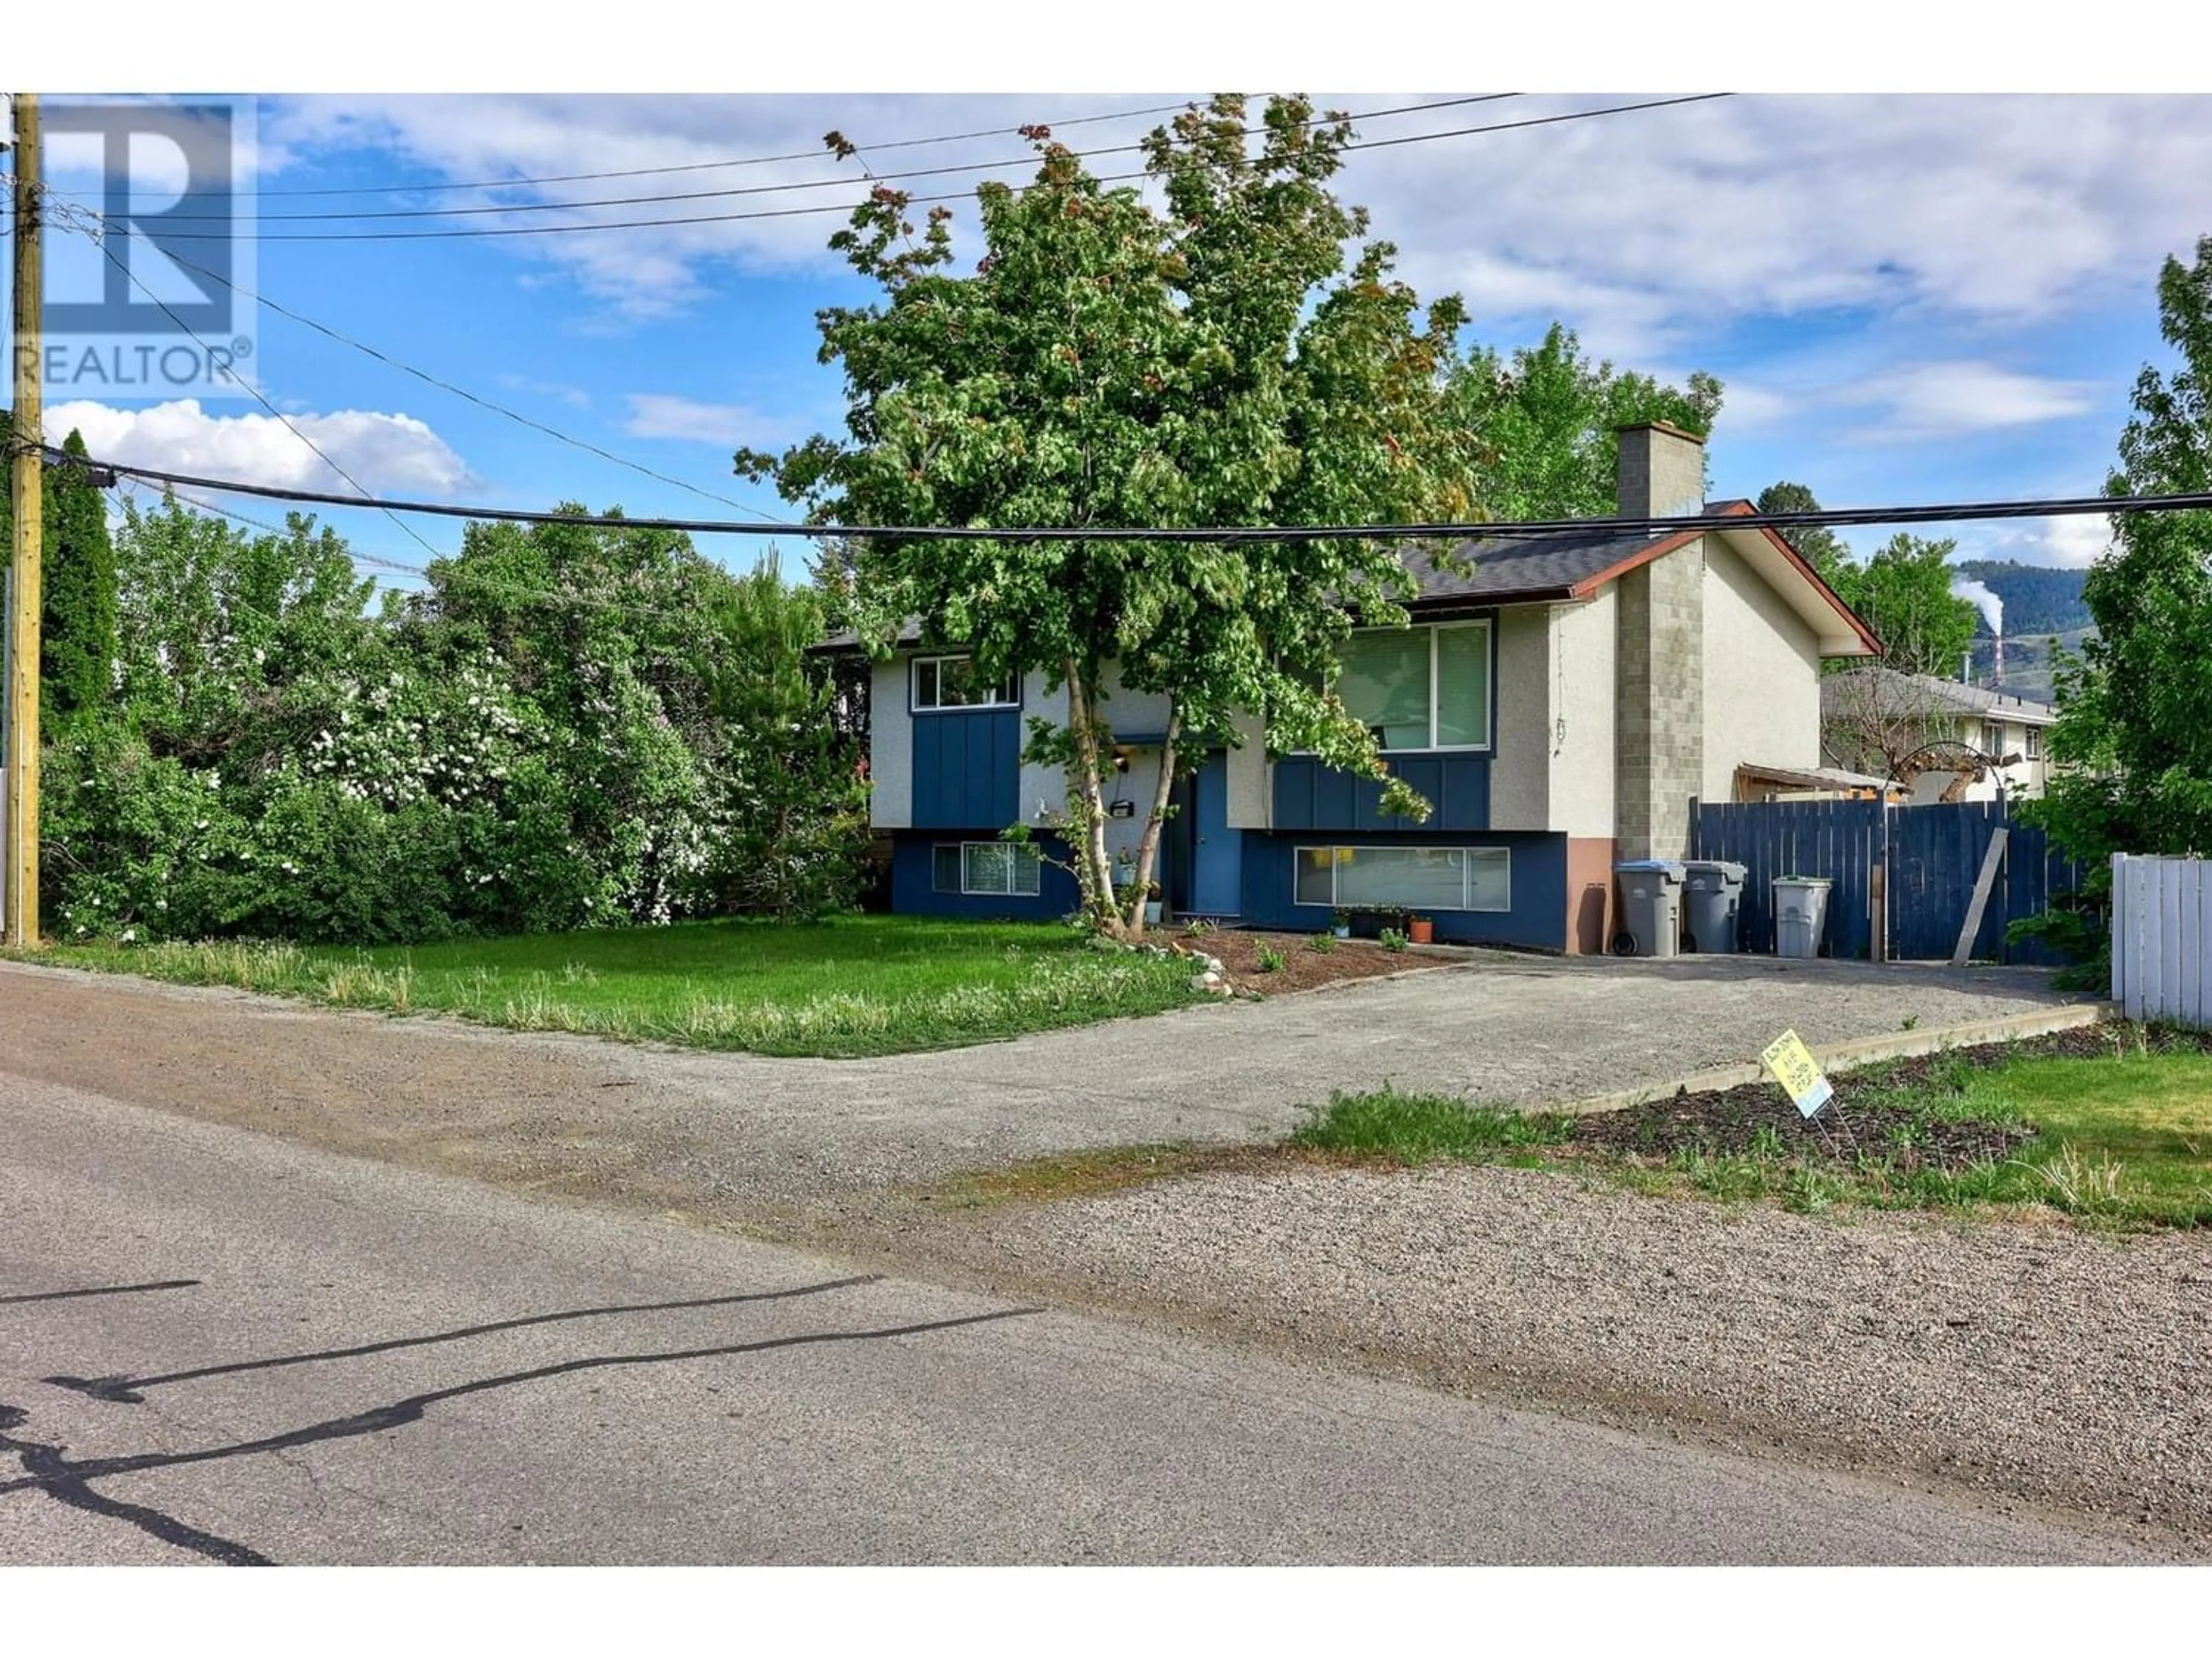 Street view for 2603 ARGYLE AVE, Kamloops British Columbia V2B4T6